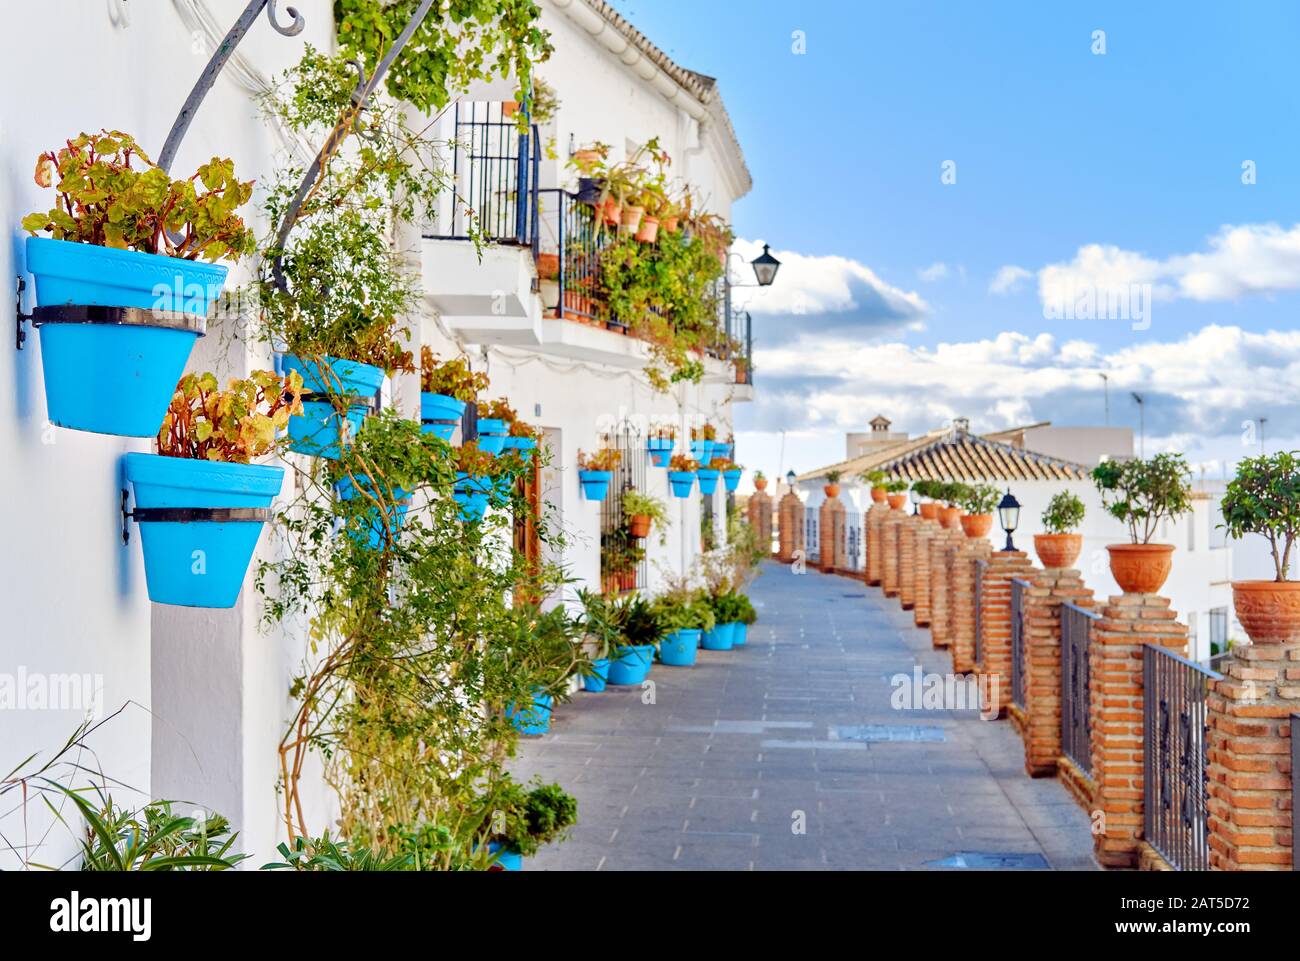 Idyllic scenery empty picturesque street of small white-washed village of Mijas. Pathway decorated with hanging plants in bright blue flowerpots Spain Stock Photo